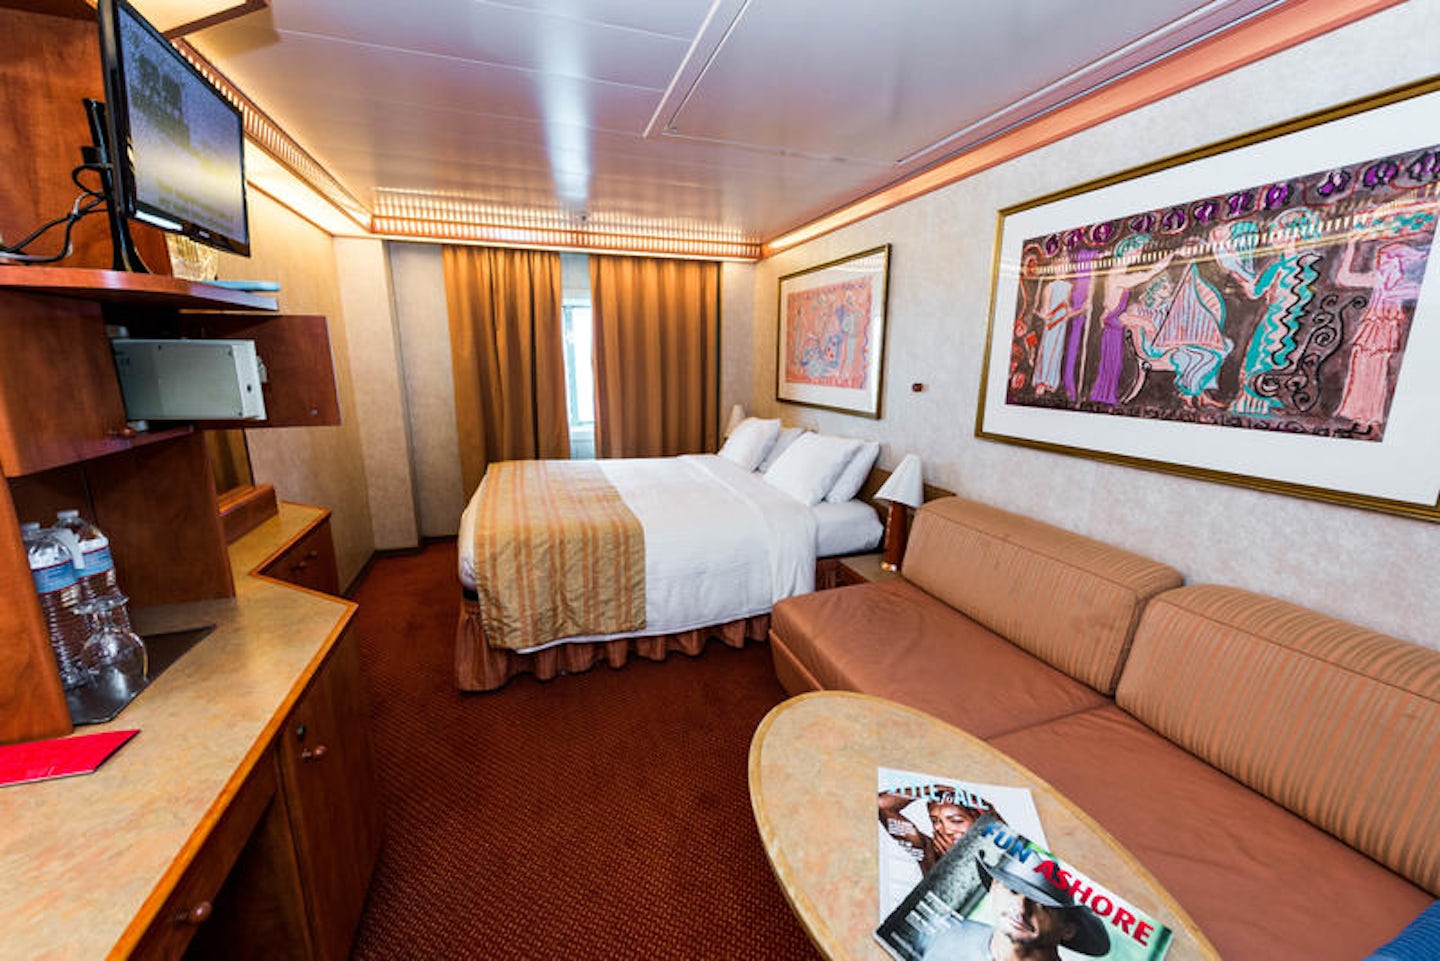 The Ocean-View Cabin on Carnival Legend